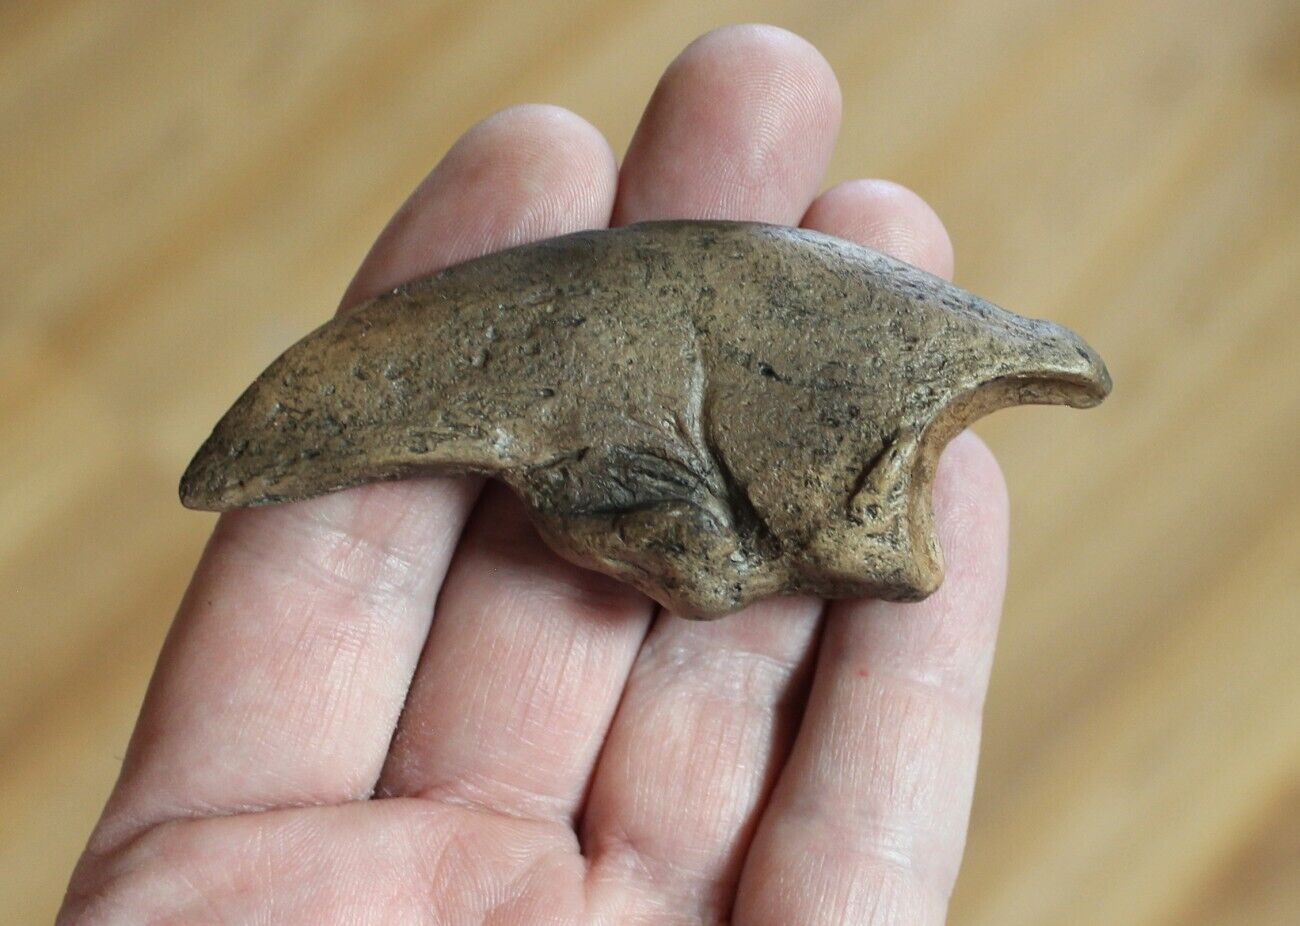 Replica Fossil Giant Sloth claw Megalonyx leptostomus Early Pleistocene